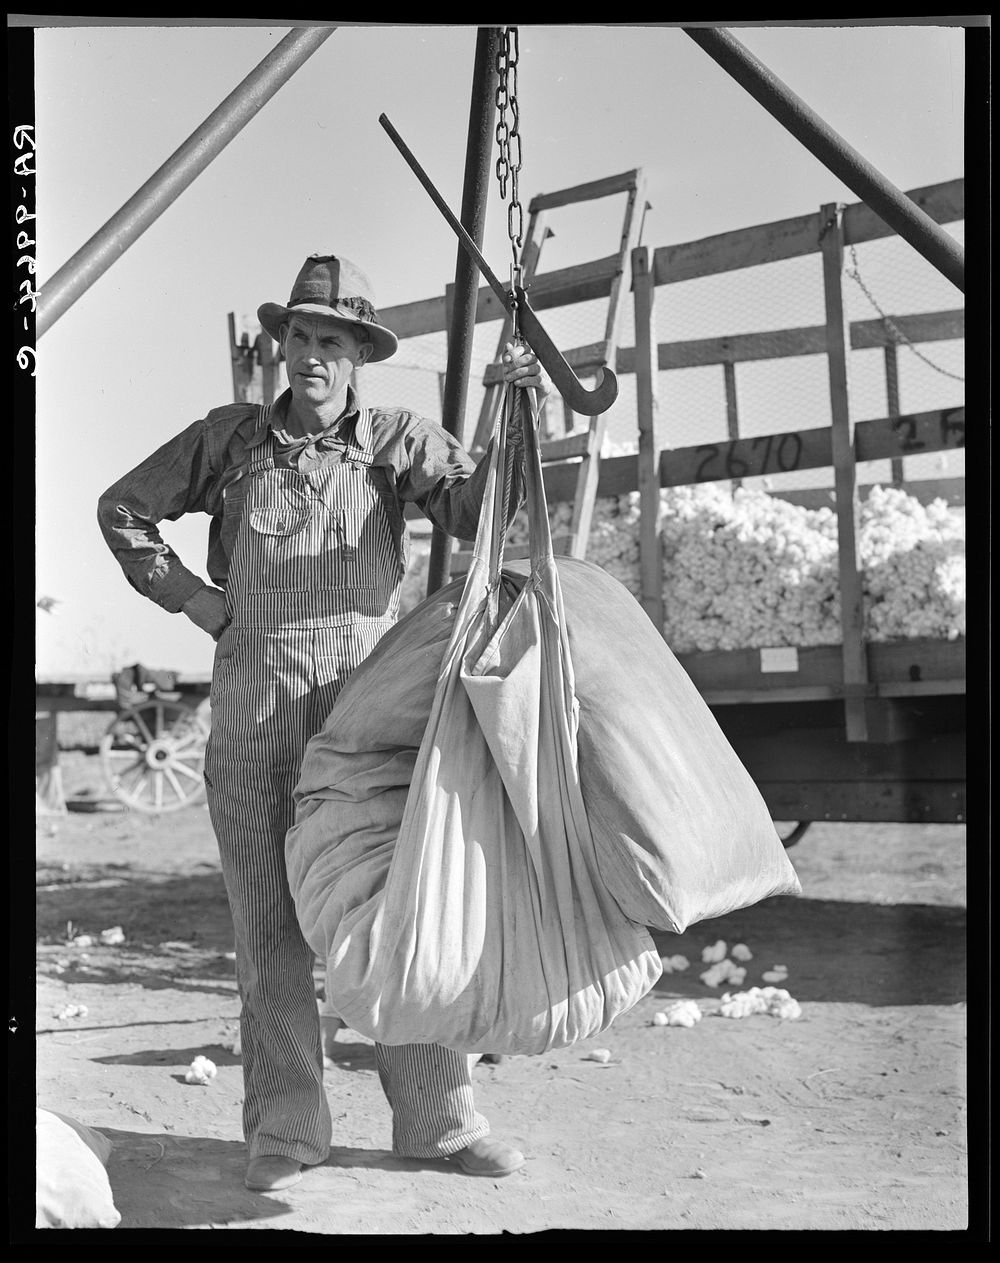 Weighing in cotton. Southern San Joaquin Valley, California. Sourced from the Library of Congress.